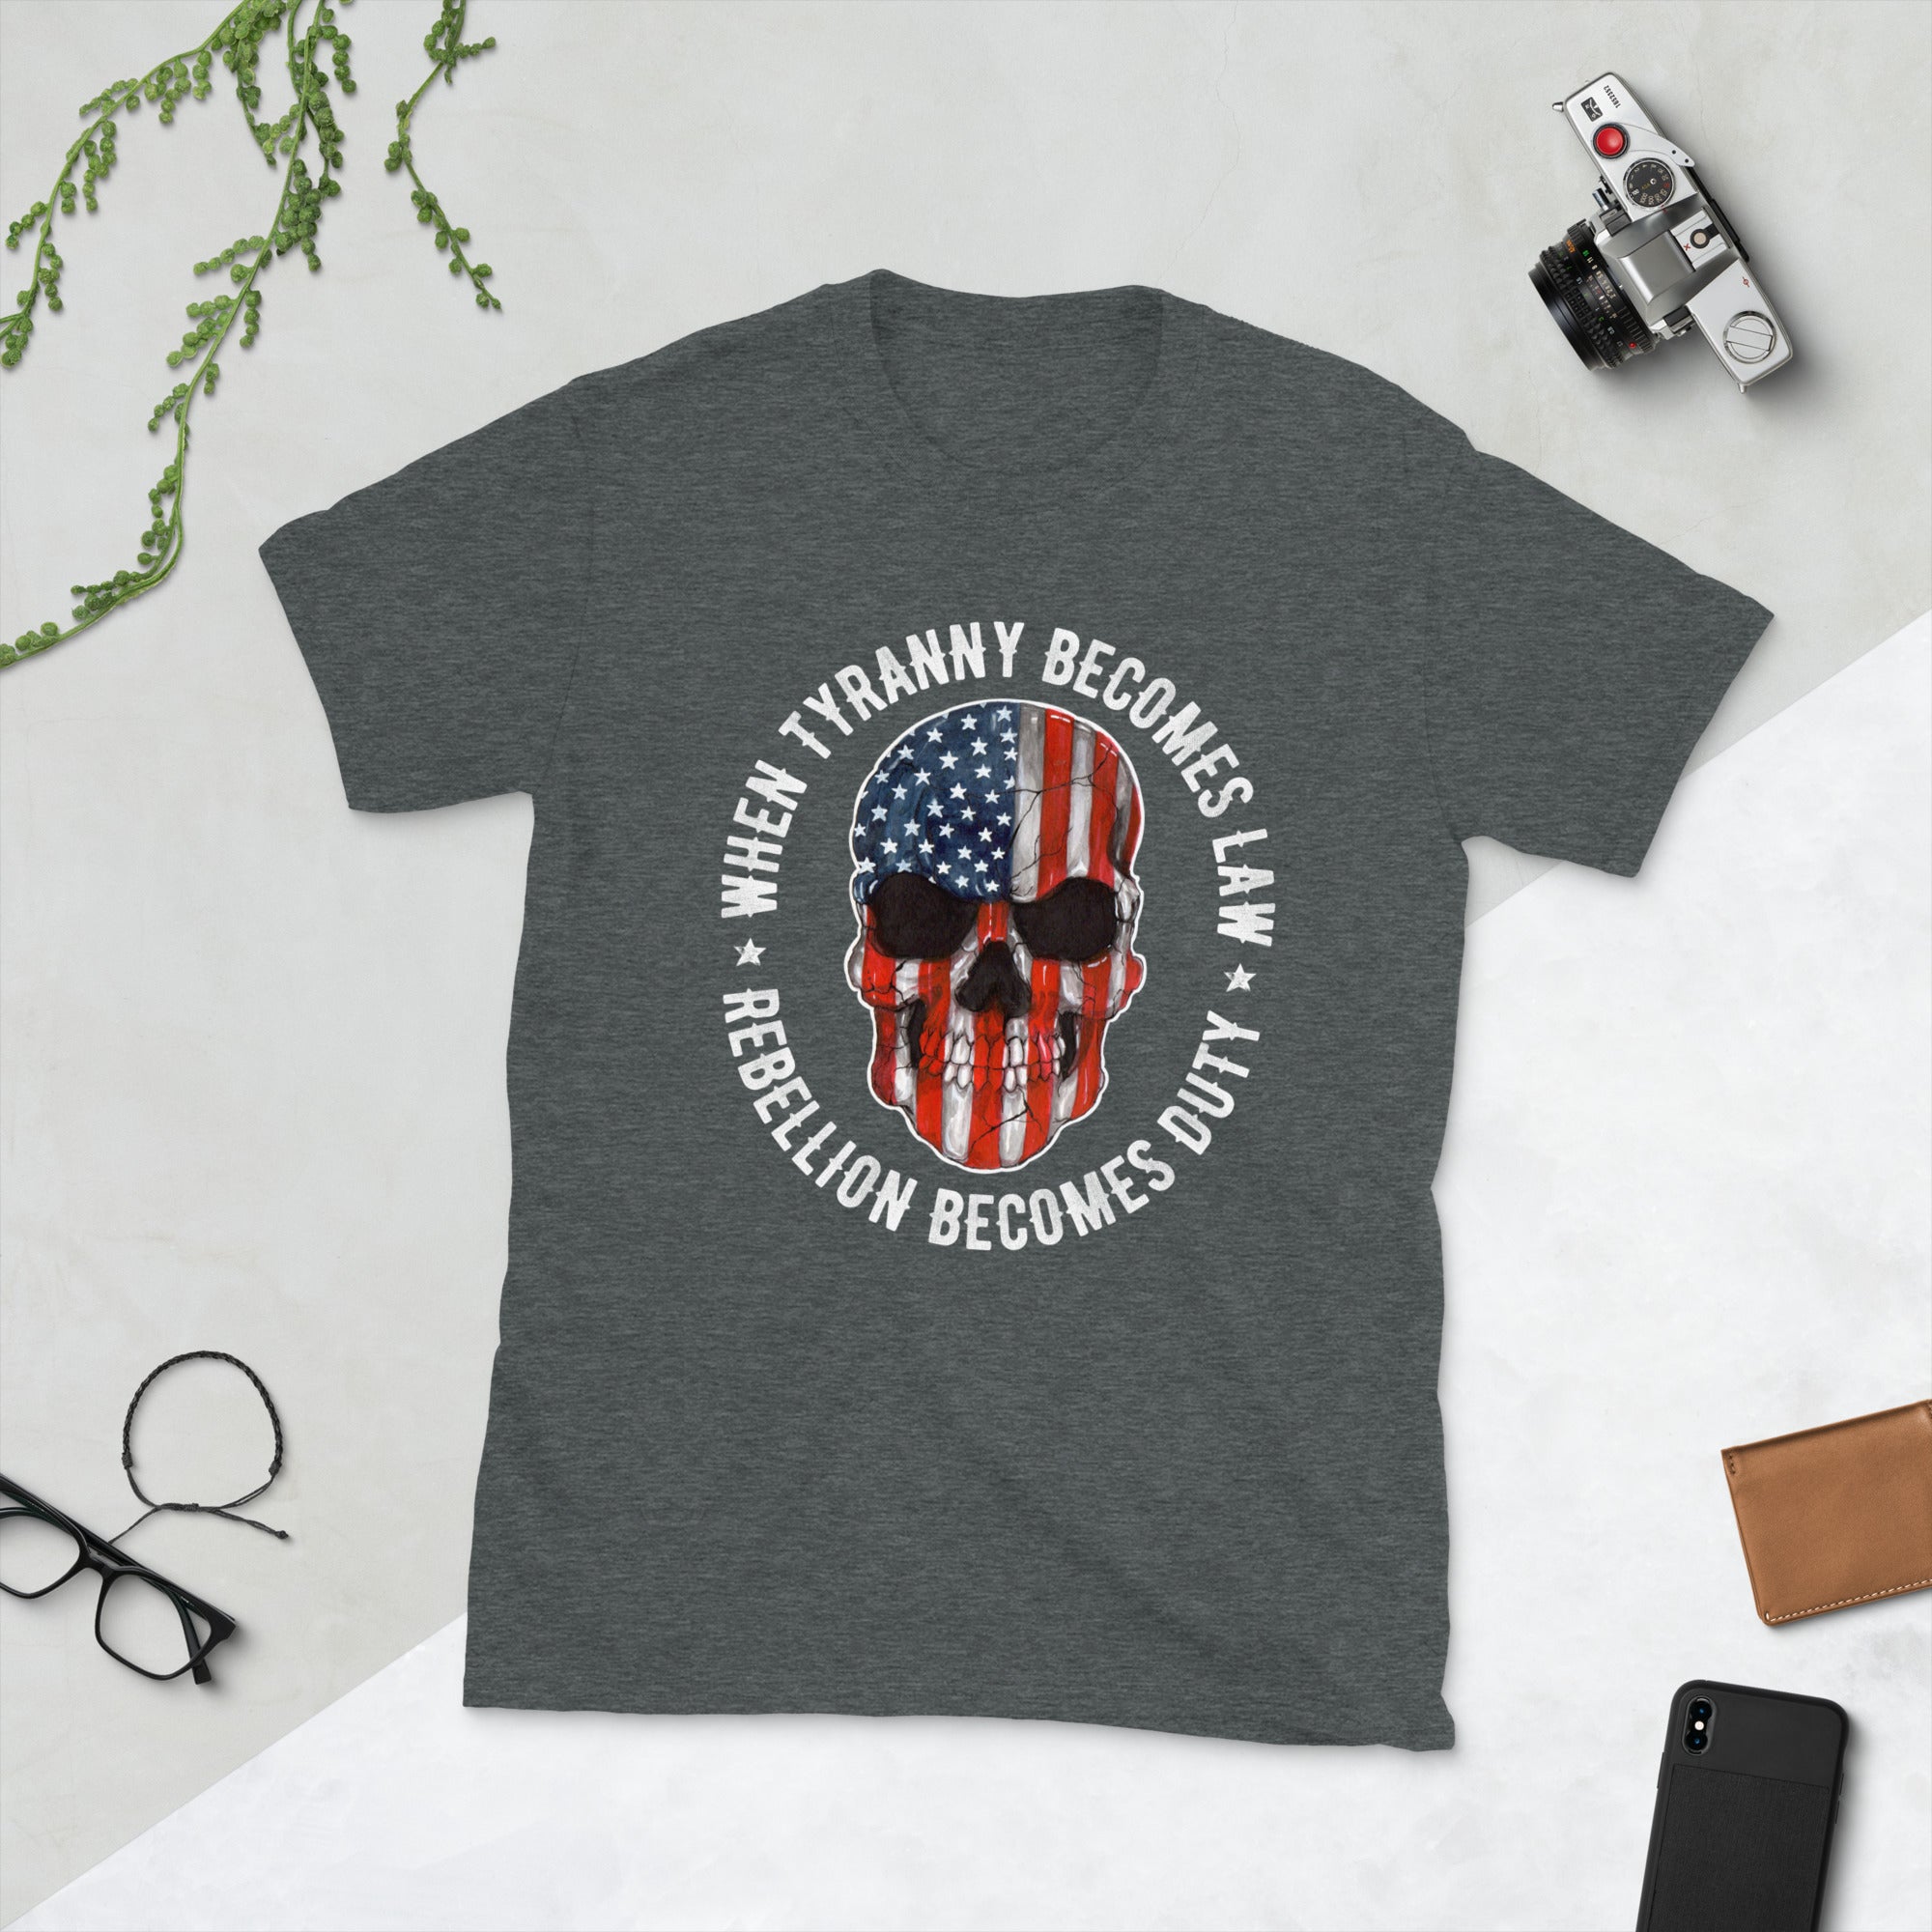 When Tyranny Becomes Law, Rebellion Becomes Duty, Thomas Jefferson Quote, 1776 Shirt, Our Freedom Shirt, Memorial Shirt, Patriotic Shirt - Madeinsea©